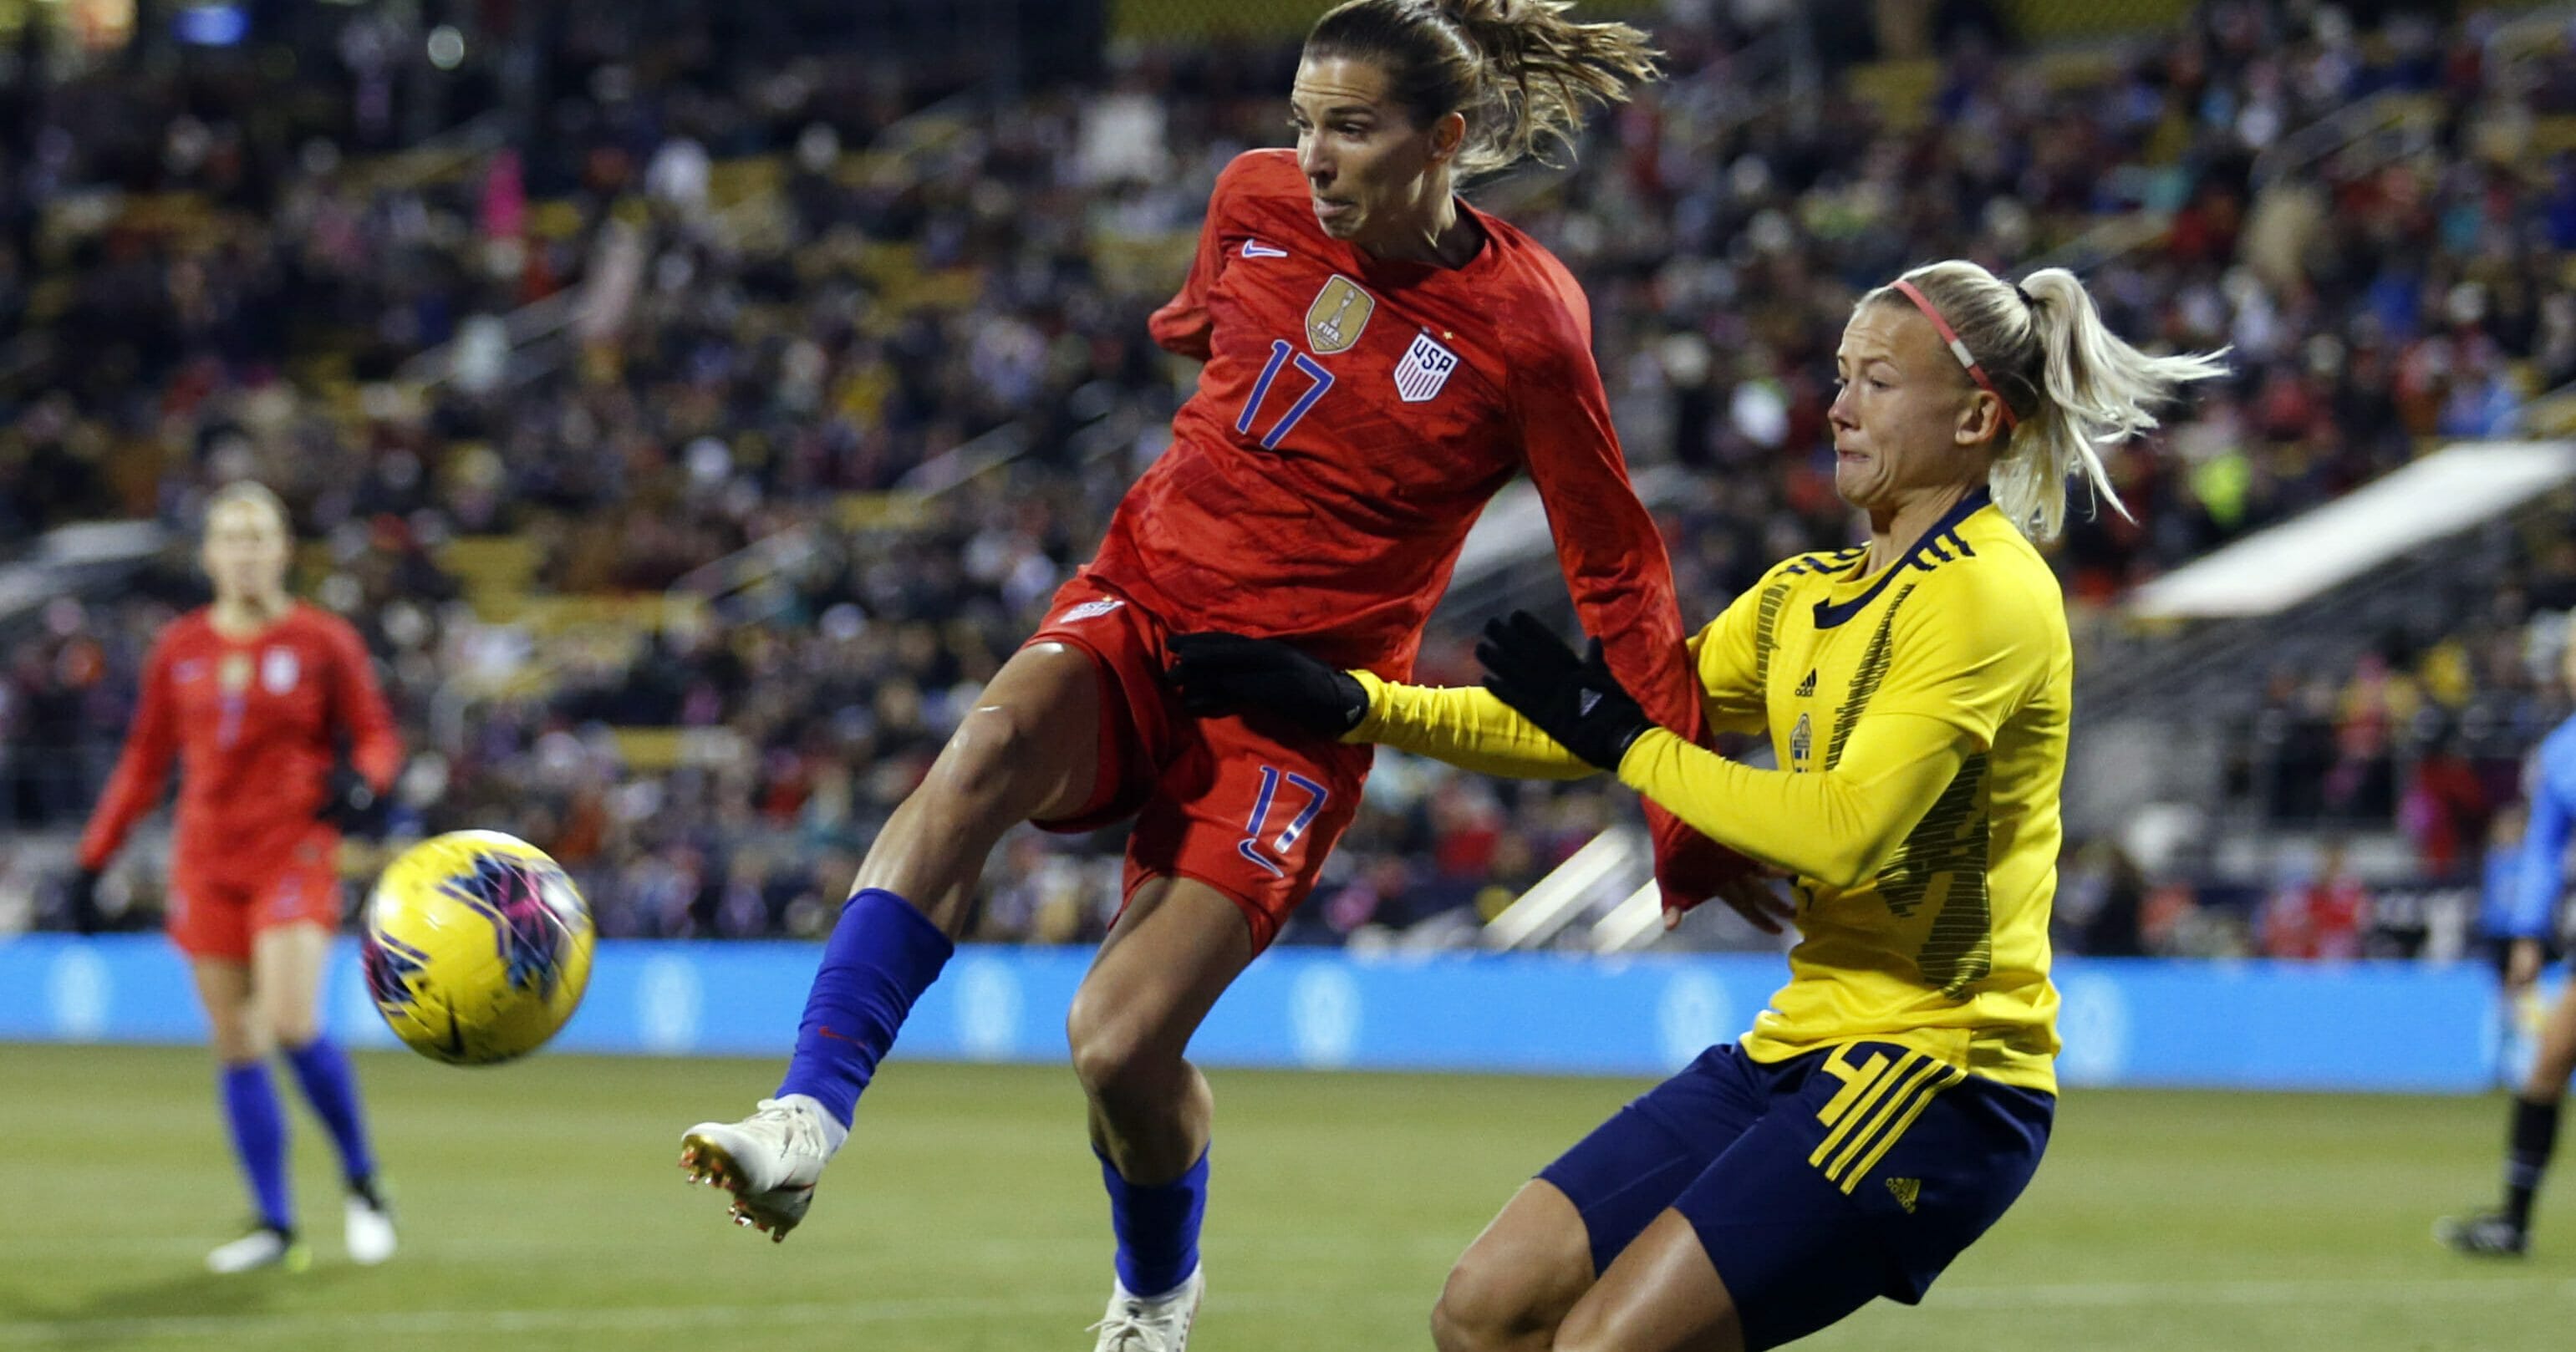 United States forward Tobin Heath, left, passes the ball in front of Sweden defender Hanna Glas during the first half of a women's international friendly soccer match in Columbus, Ohio, on Nov. 7, 2019.